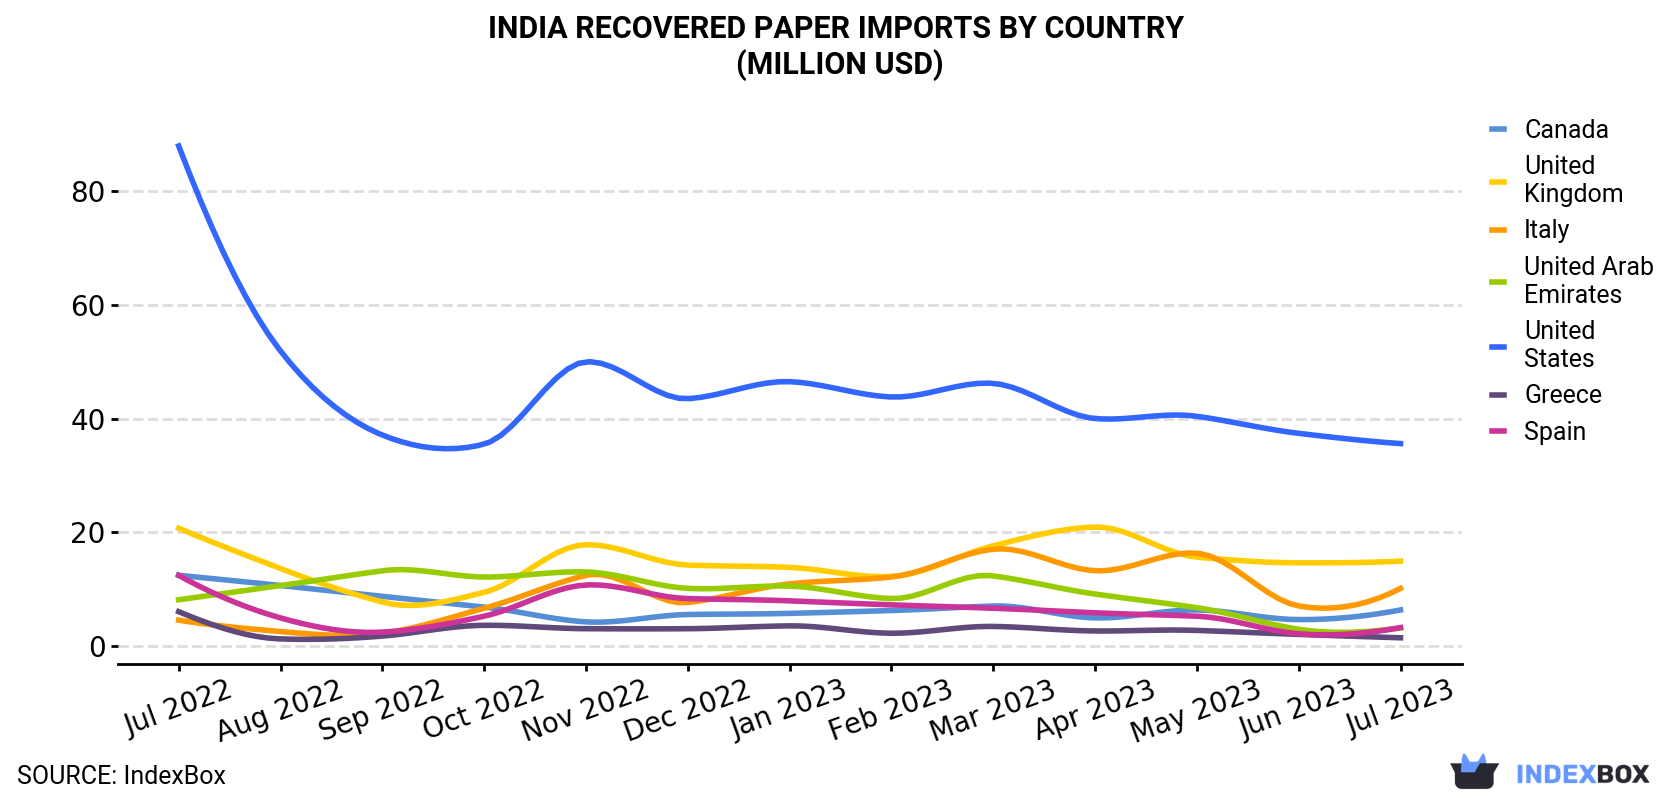 India Recovered Paper Imports By Country (Million USD)